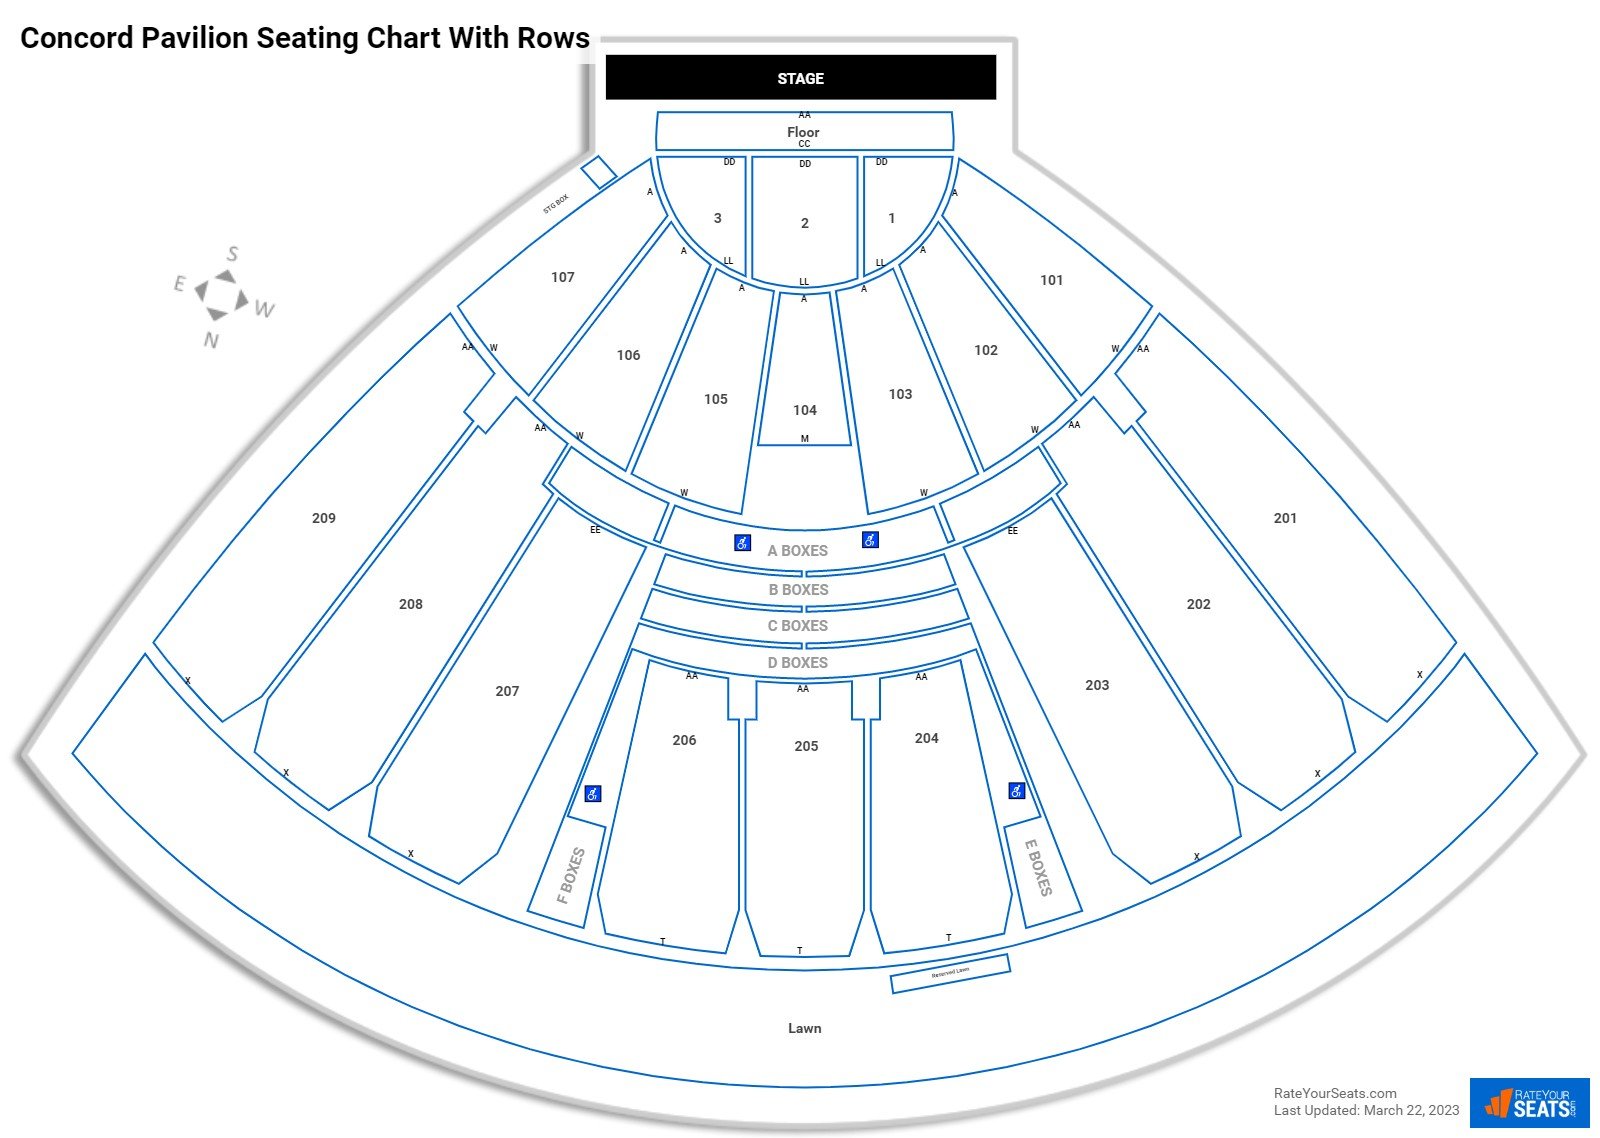 Concord Pavilion Seating Chart With Rows 